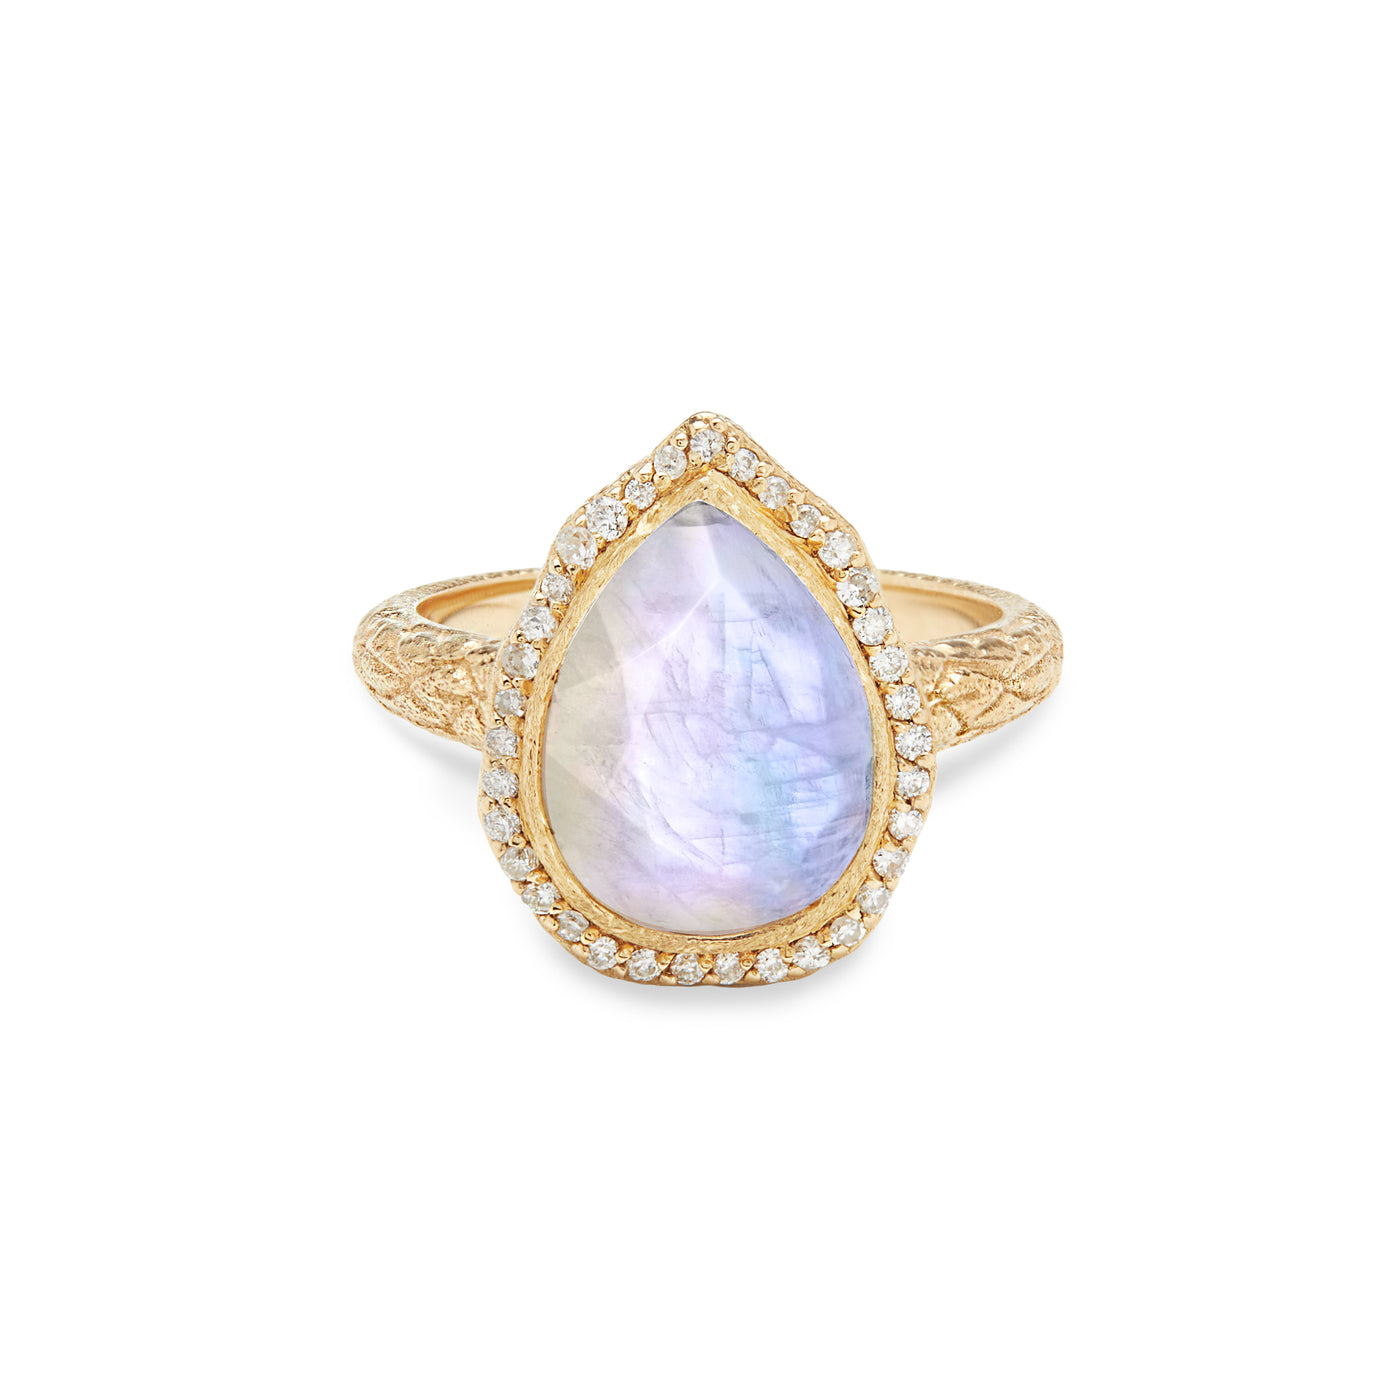 14 Karat Yellow Gold Ring with Pear Shaped Moonstone Stone with Halo of White Diamonds Against White Background